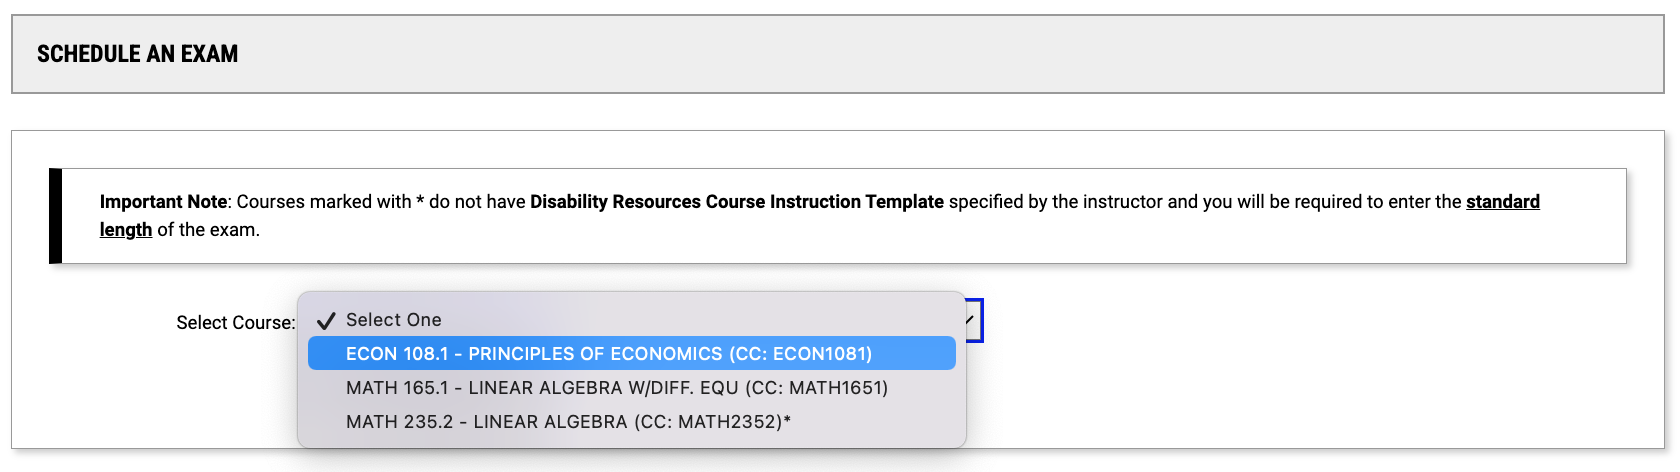 Screenshot of the dropdown menu of courses in the Schedule An Exam section of the profile.